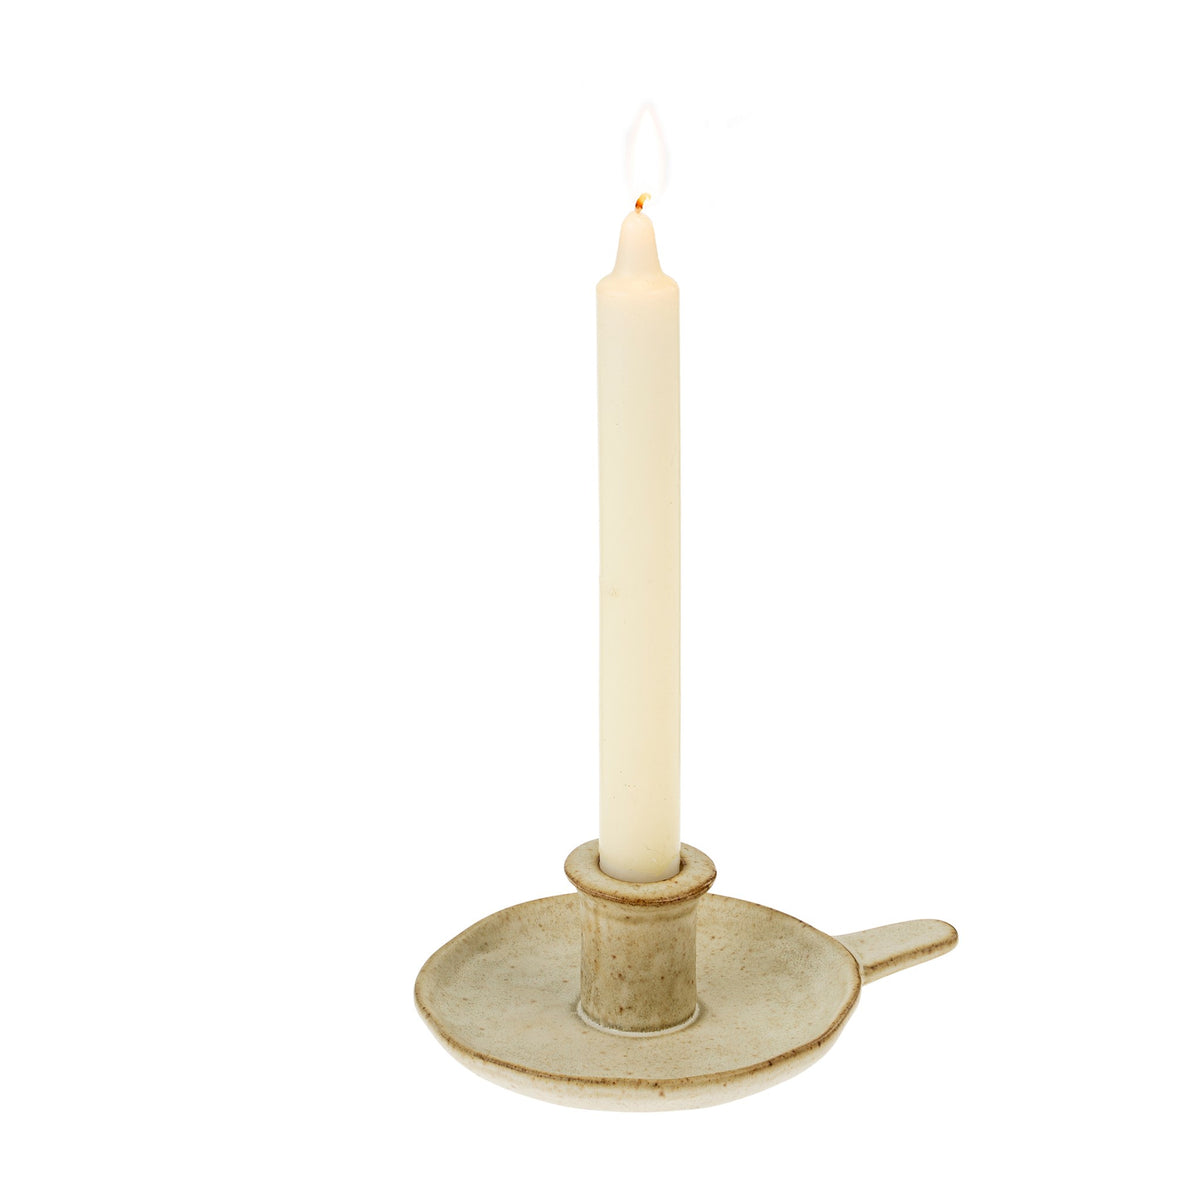 Homestead Candle Holder